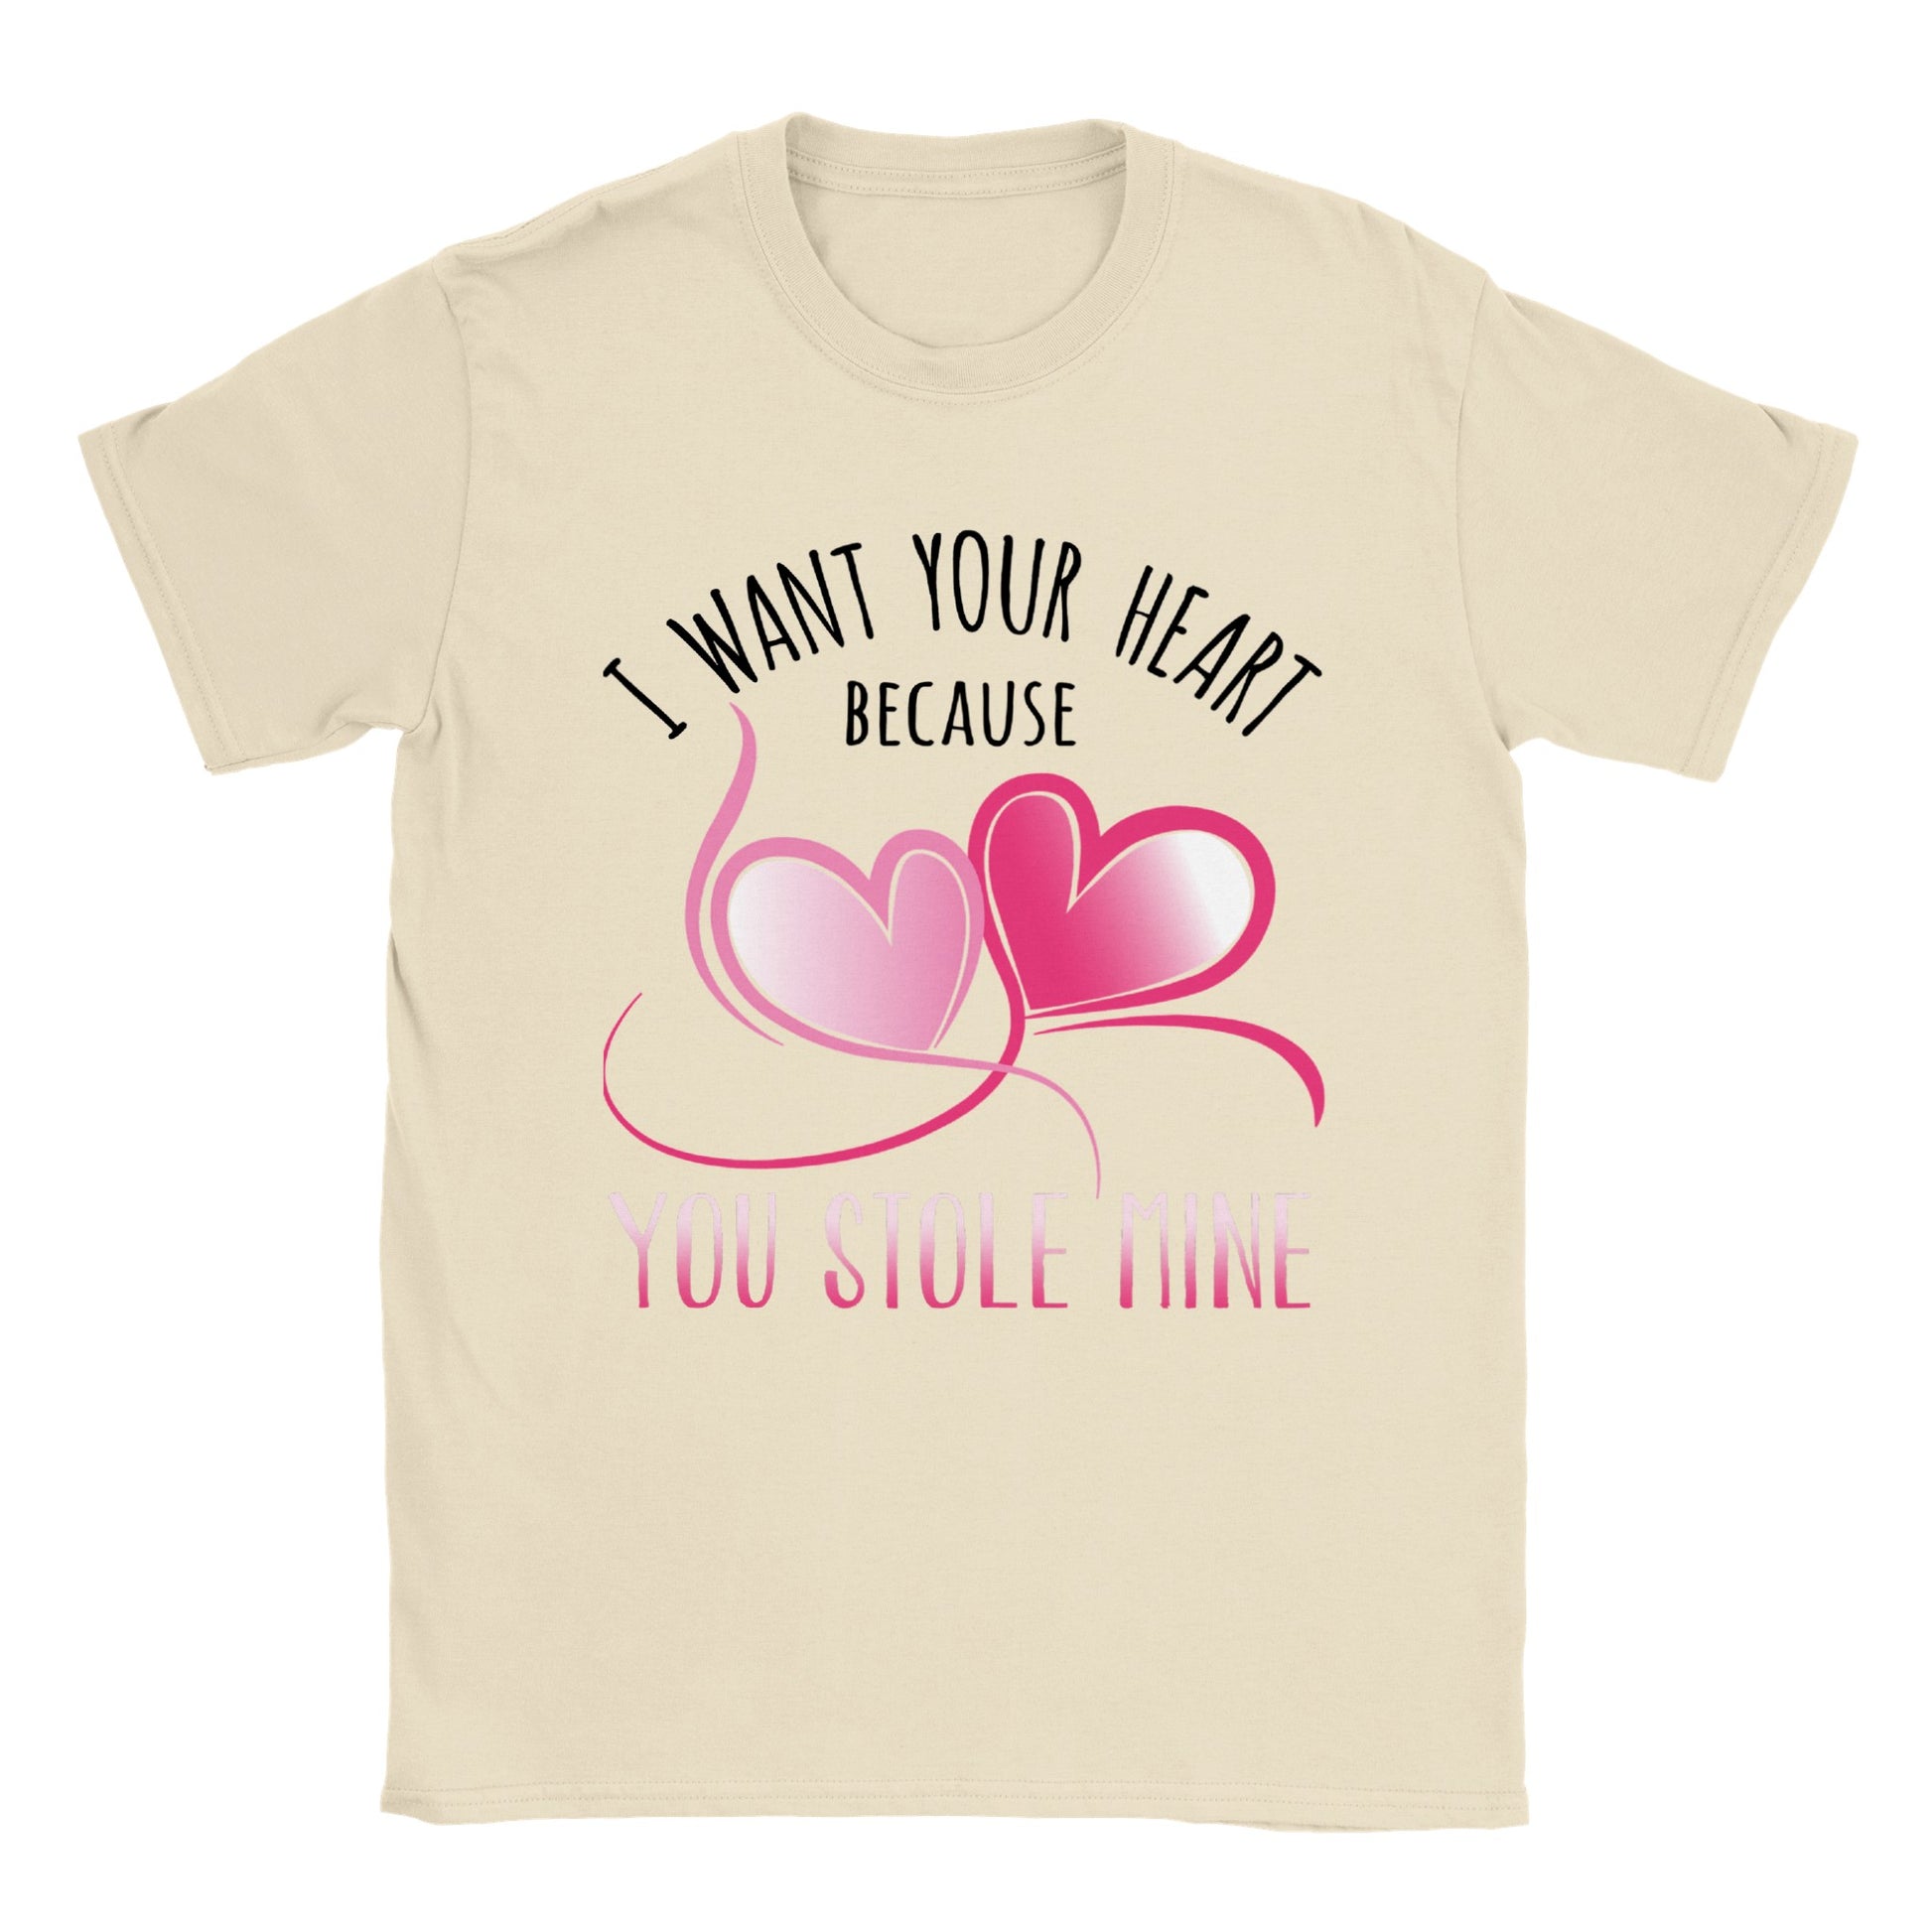 I Want Your Heart... - Classic Unisex Crewneck T-shirt - Mister Snarky's